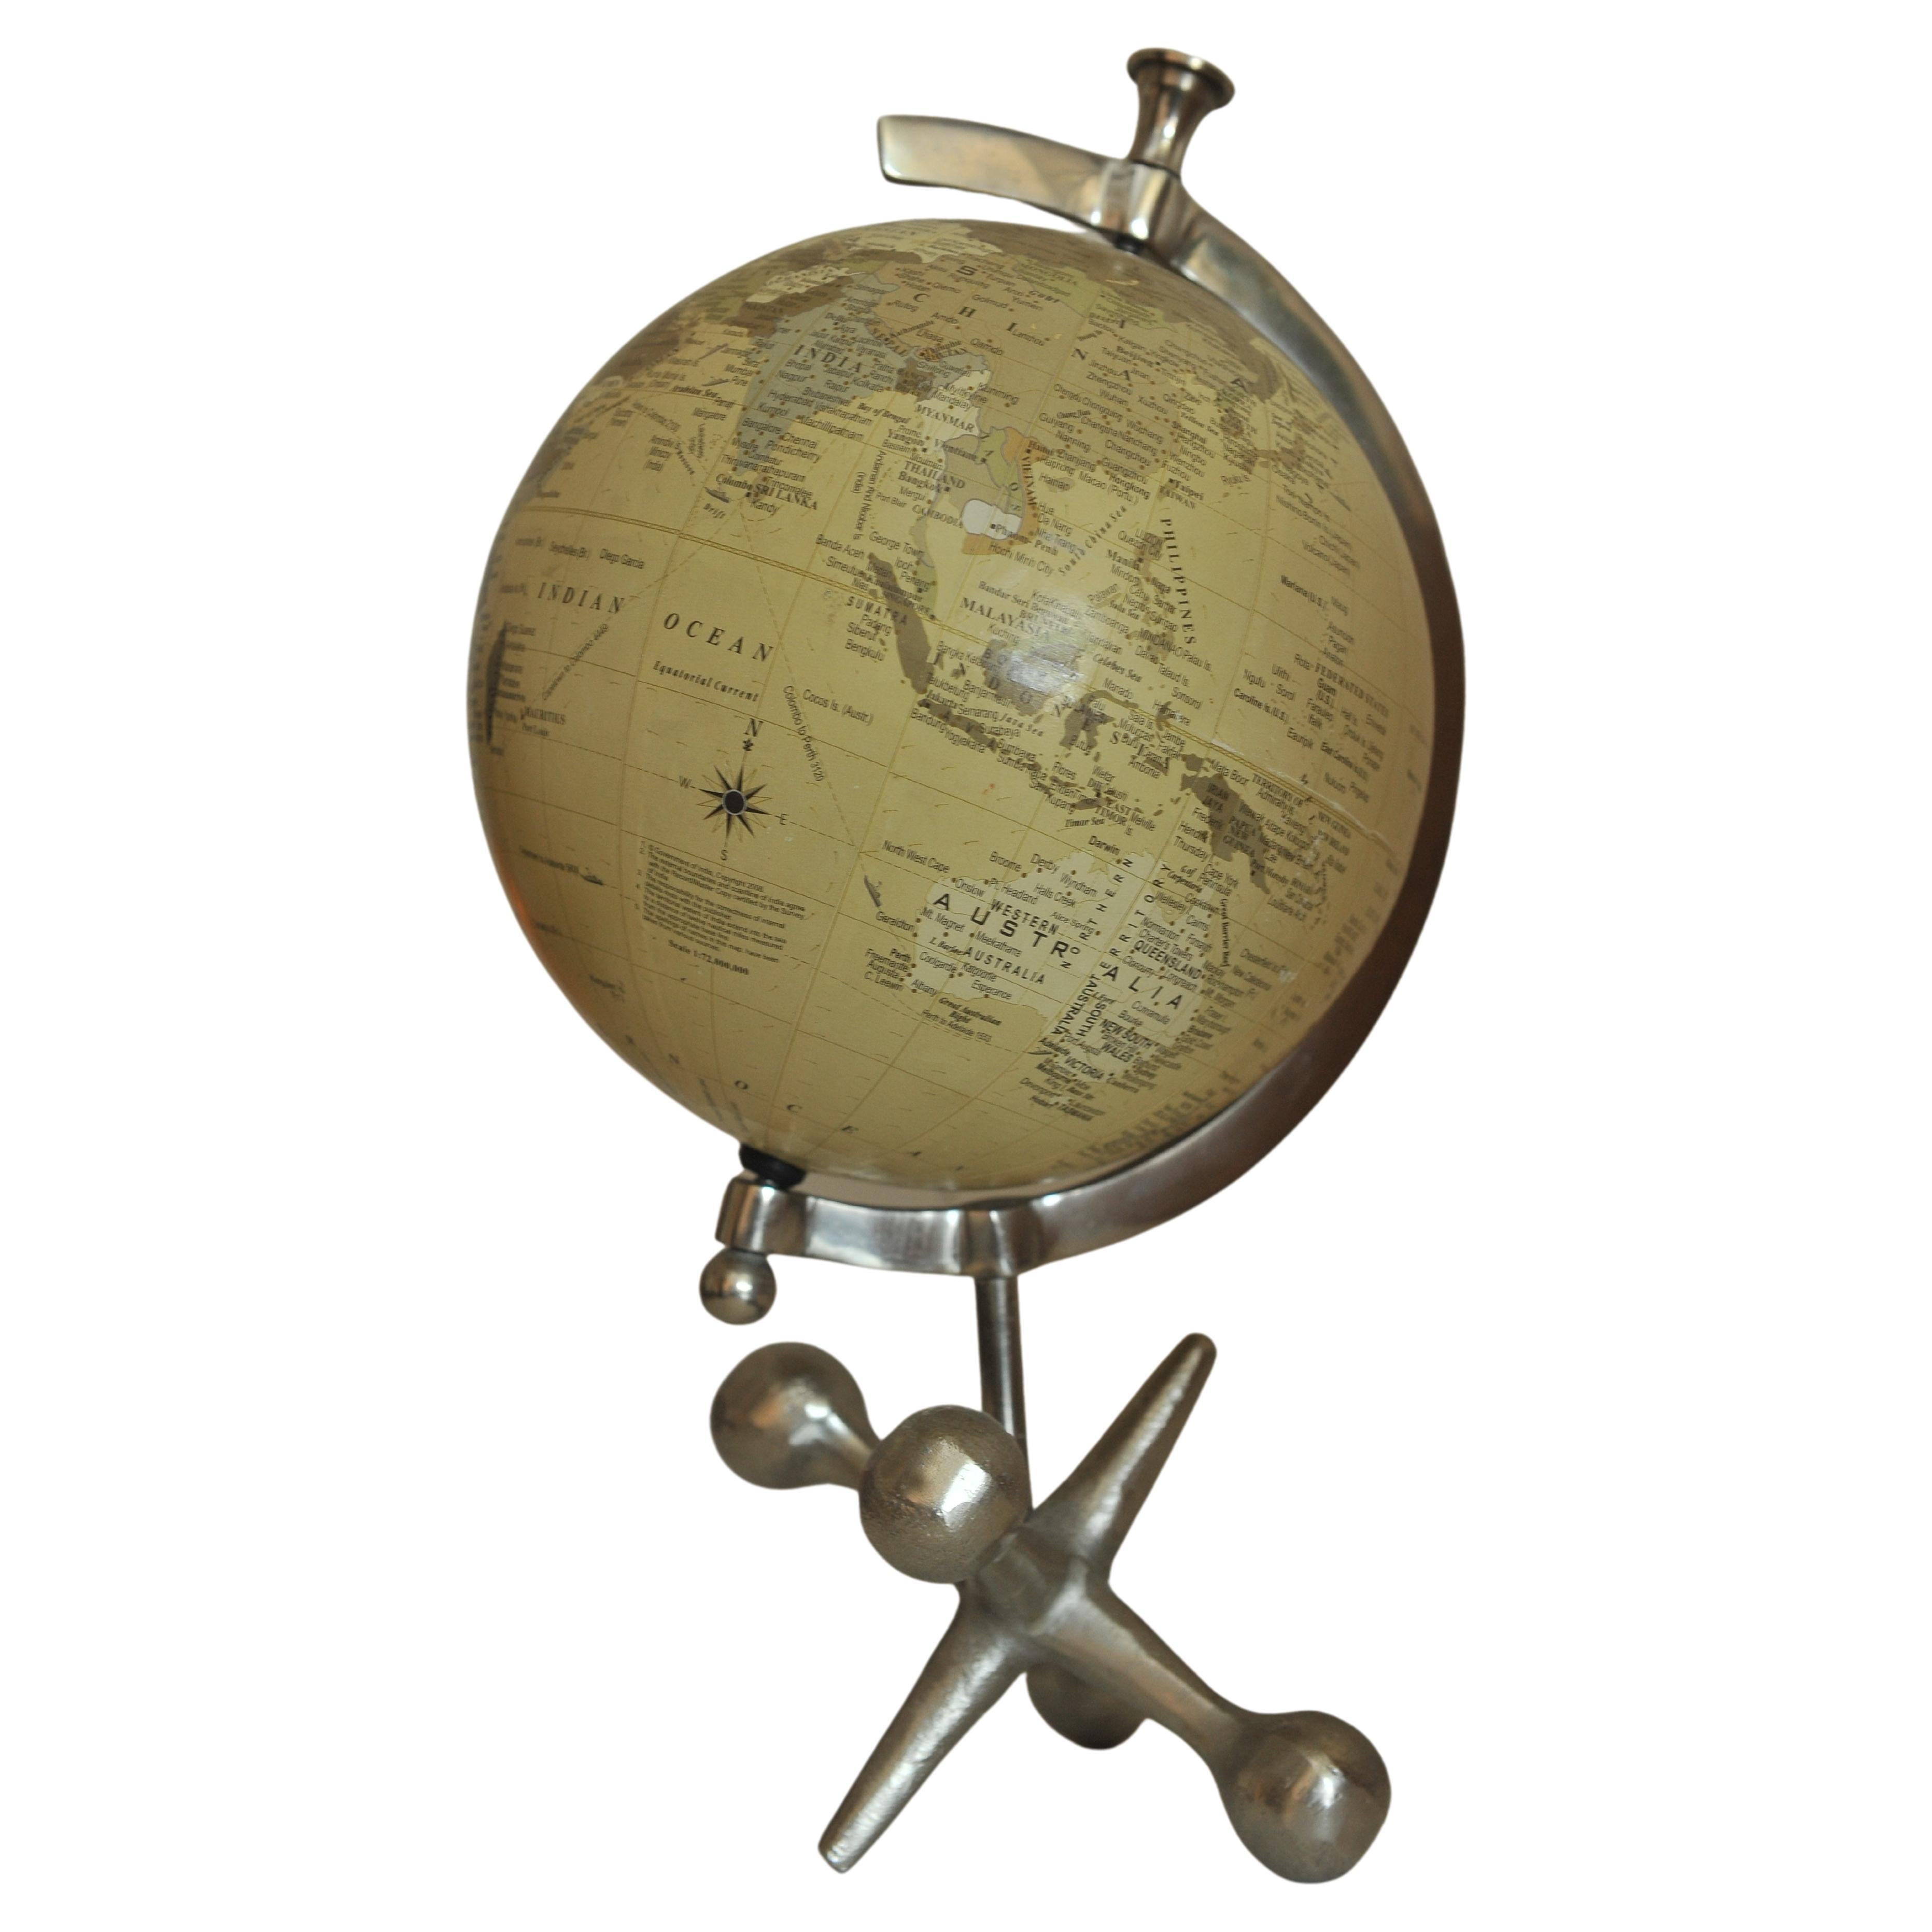 A Rotating World Globe on A Metal Base.
Ideal for any Desk or Study.
